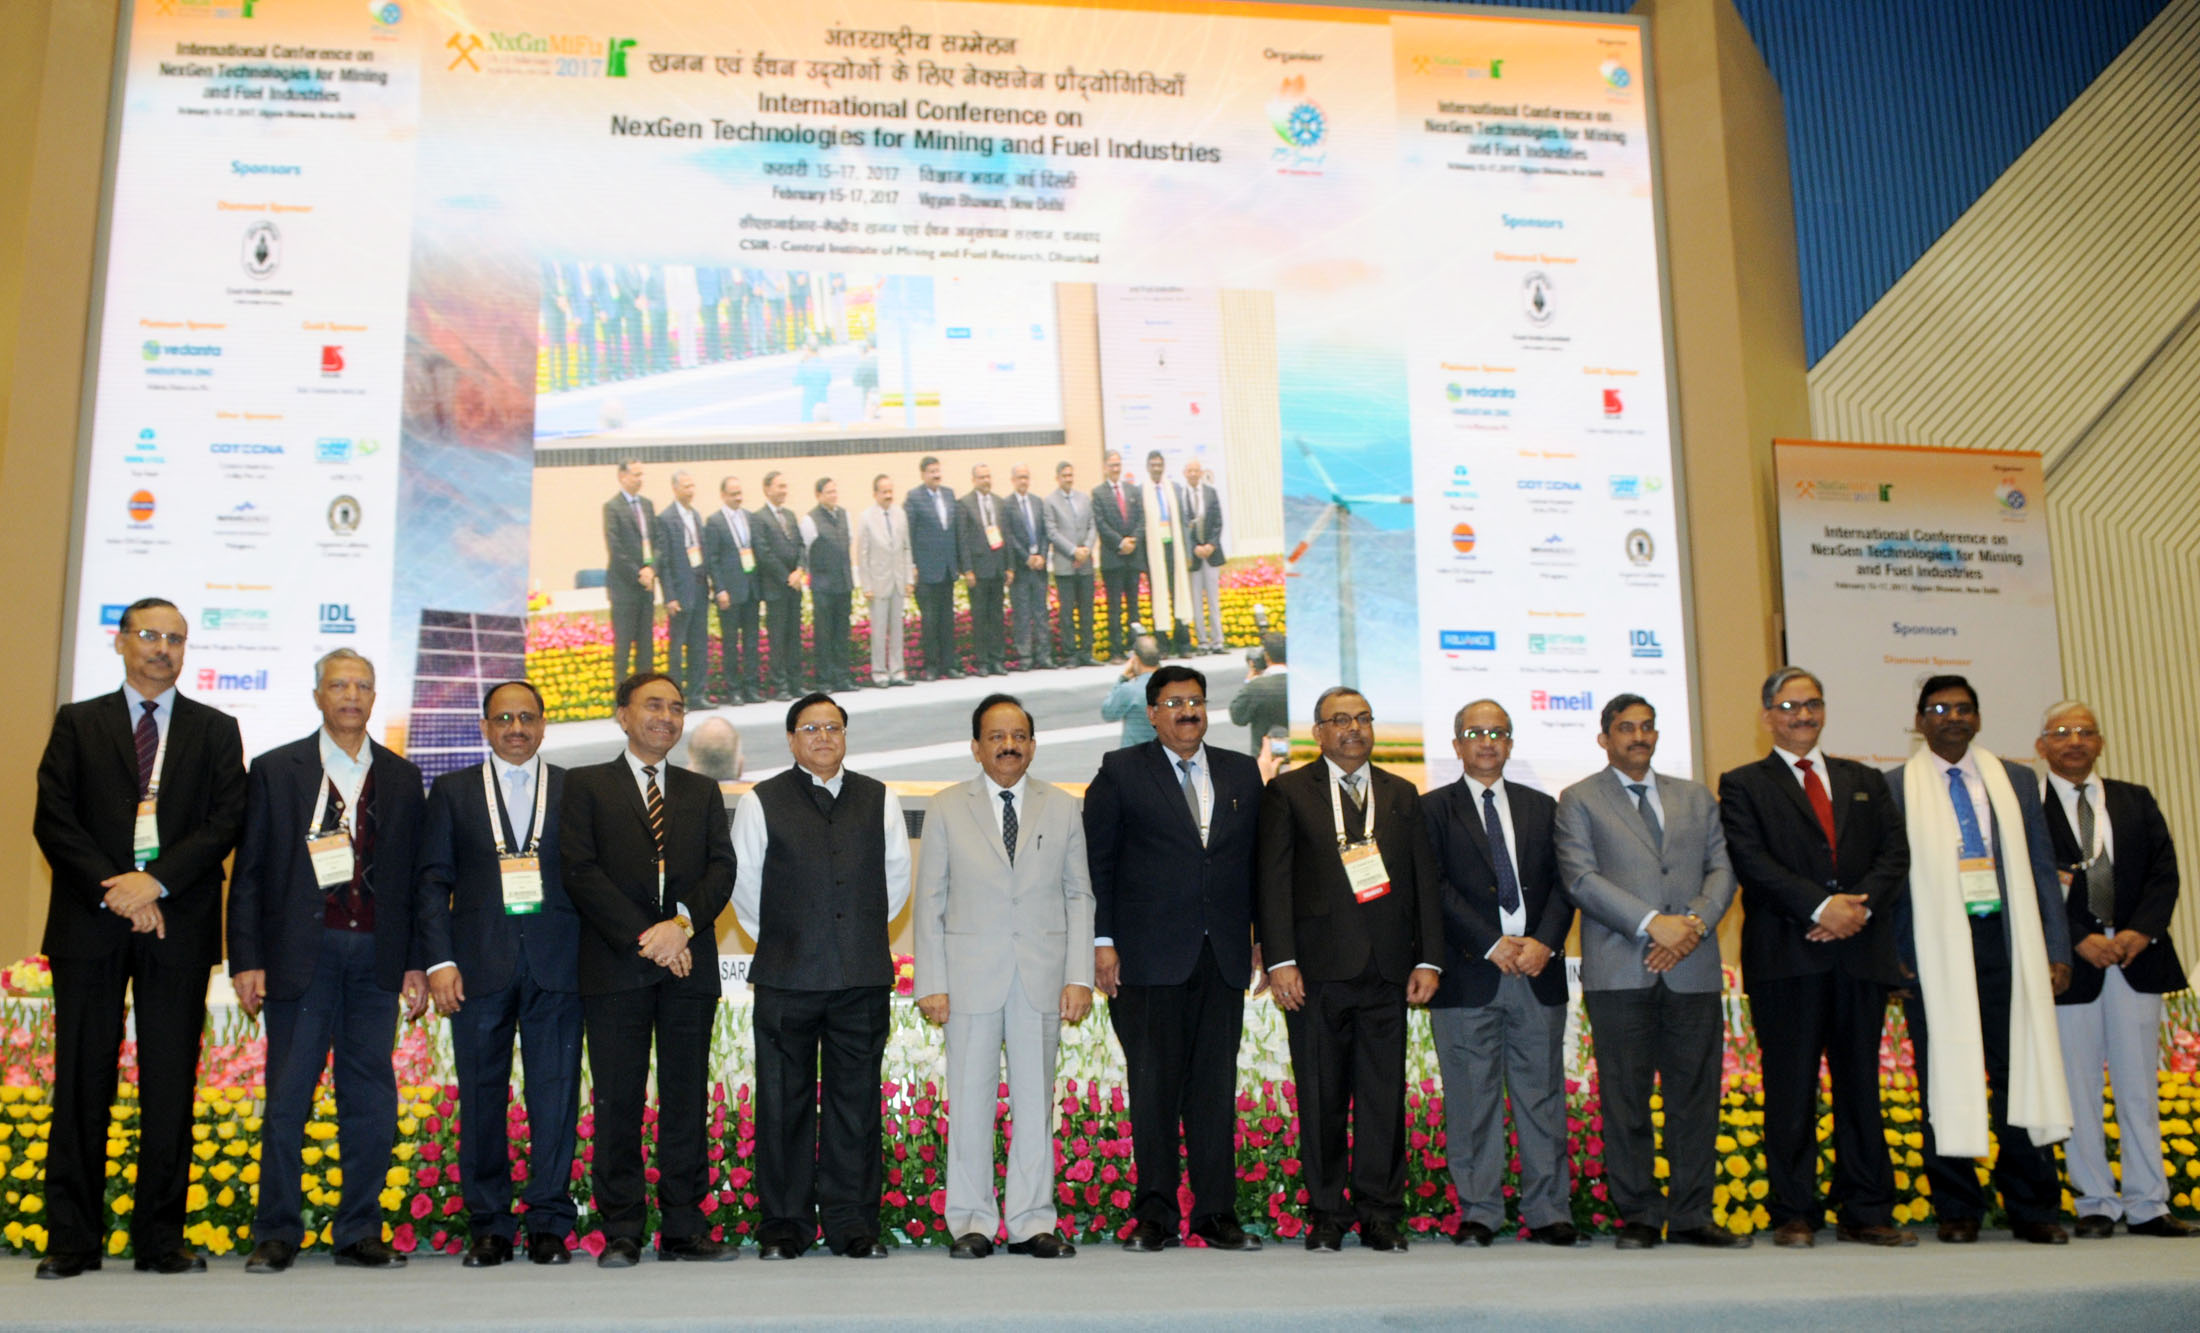 The Union Minister for Science & Technology and Earth Sciences, Dr. Harsh Vardhan in a group photograph at the inauguration of the International Conference on NexGen Technologies for Mining and Fuel Industries - NxGnMiFu - 2017, organised by CSIR-Central Institute of Mining & Fuel Research (CSIR-CIMFR), in New Delhi on February 15, 2017. The Member, NITI Aayog, Dr. V.K. Saraswat and the DG, CSIR, Dr. Shri Girish Sahni are also seen.